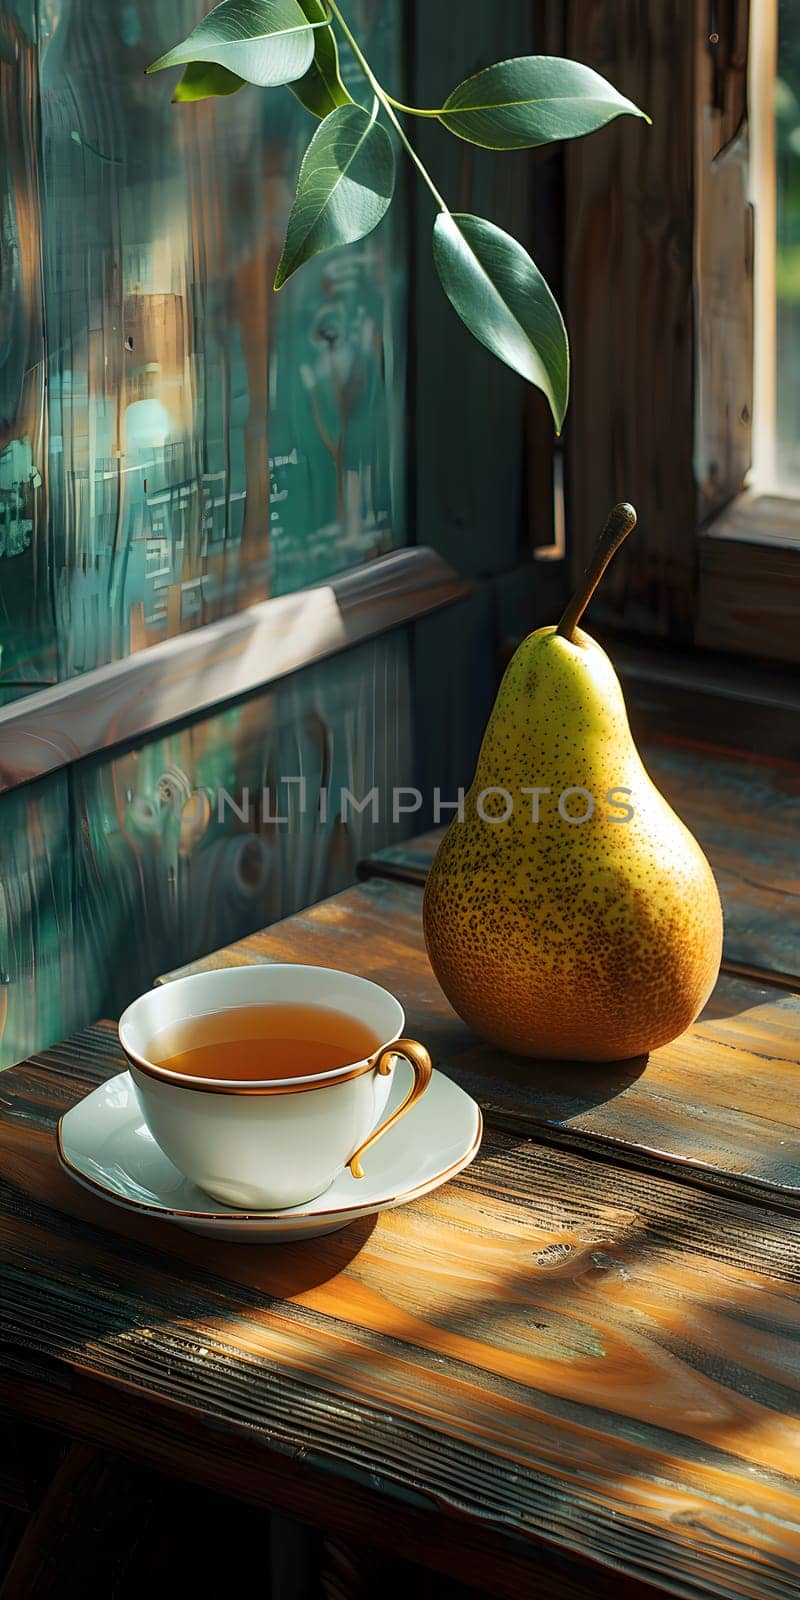 A cup of tea and a pear sit on a wooden table, surrounded by rustic dishware by Nadtochiy